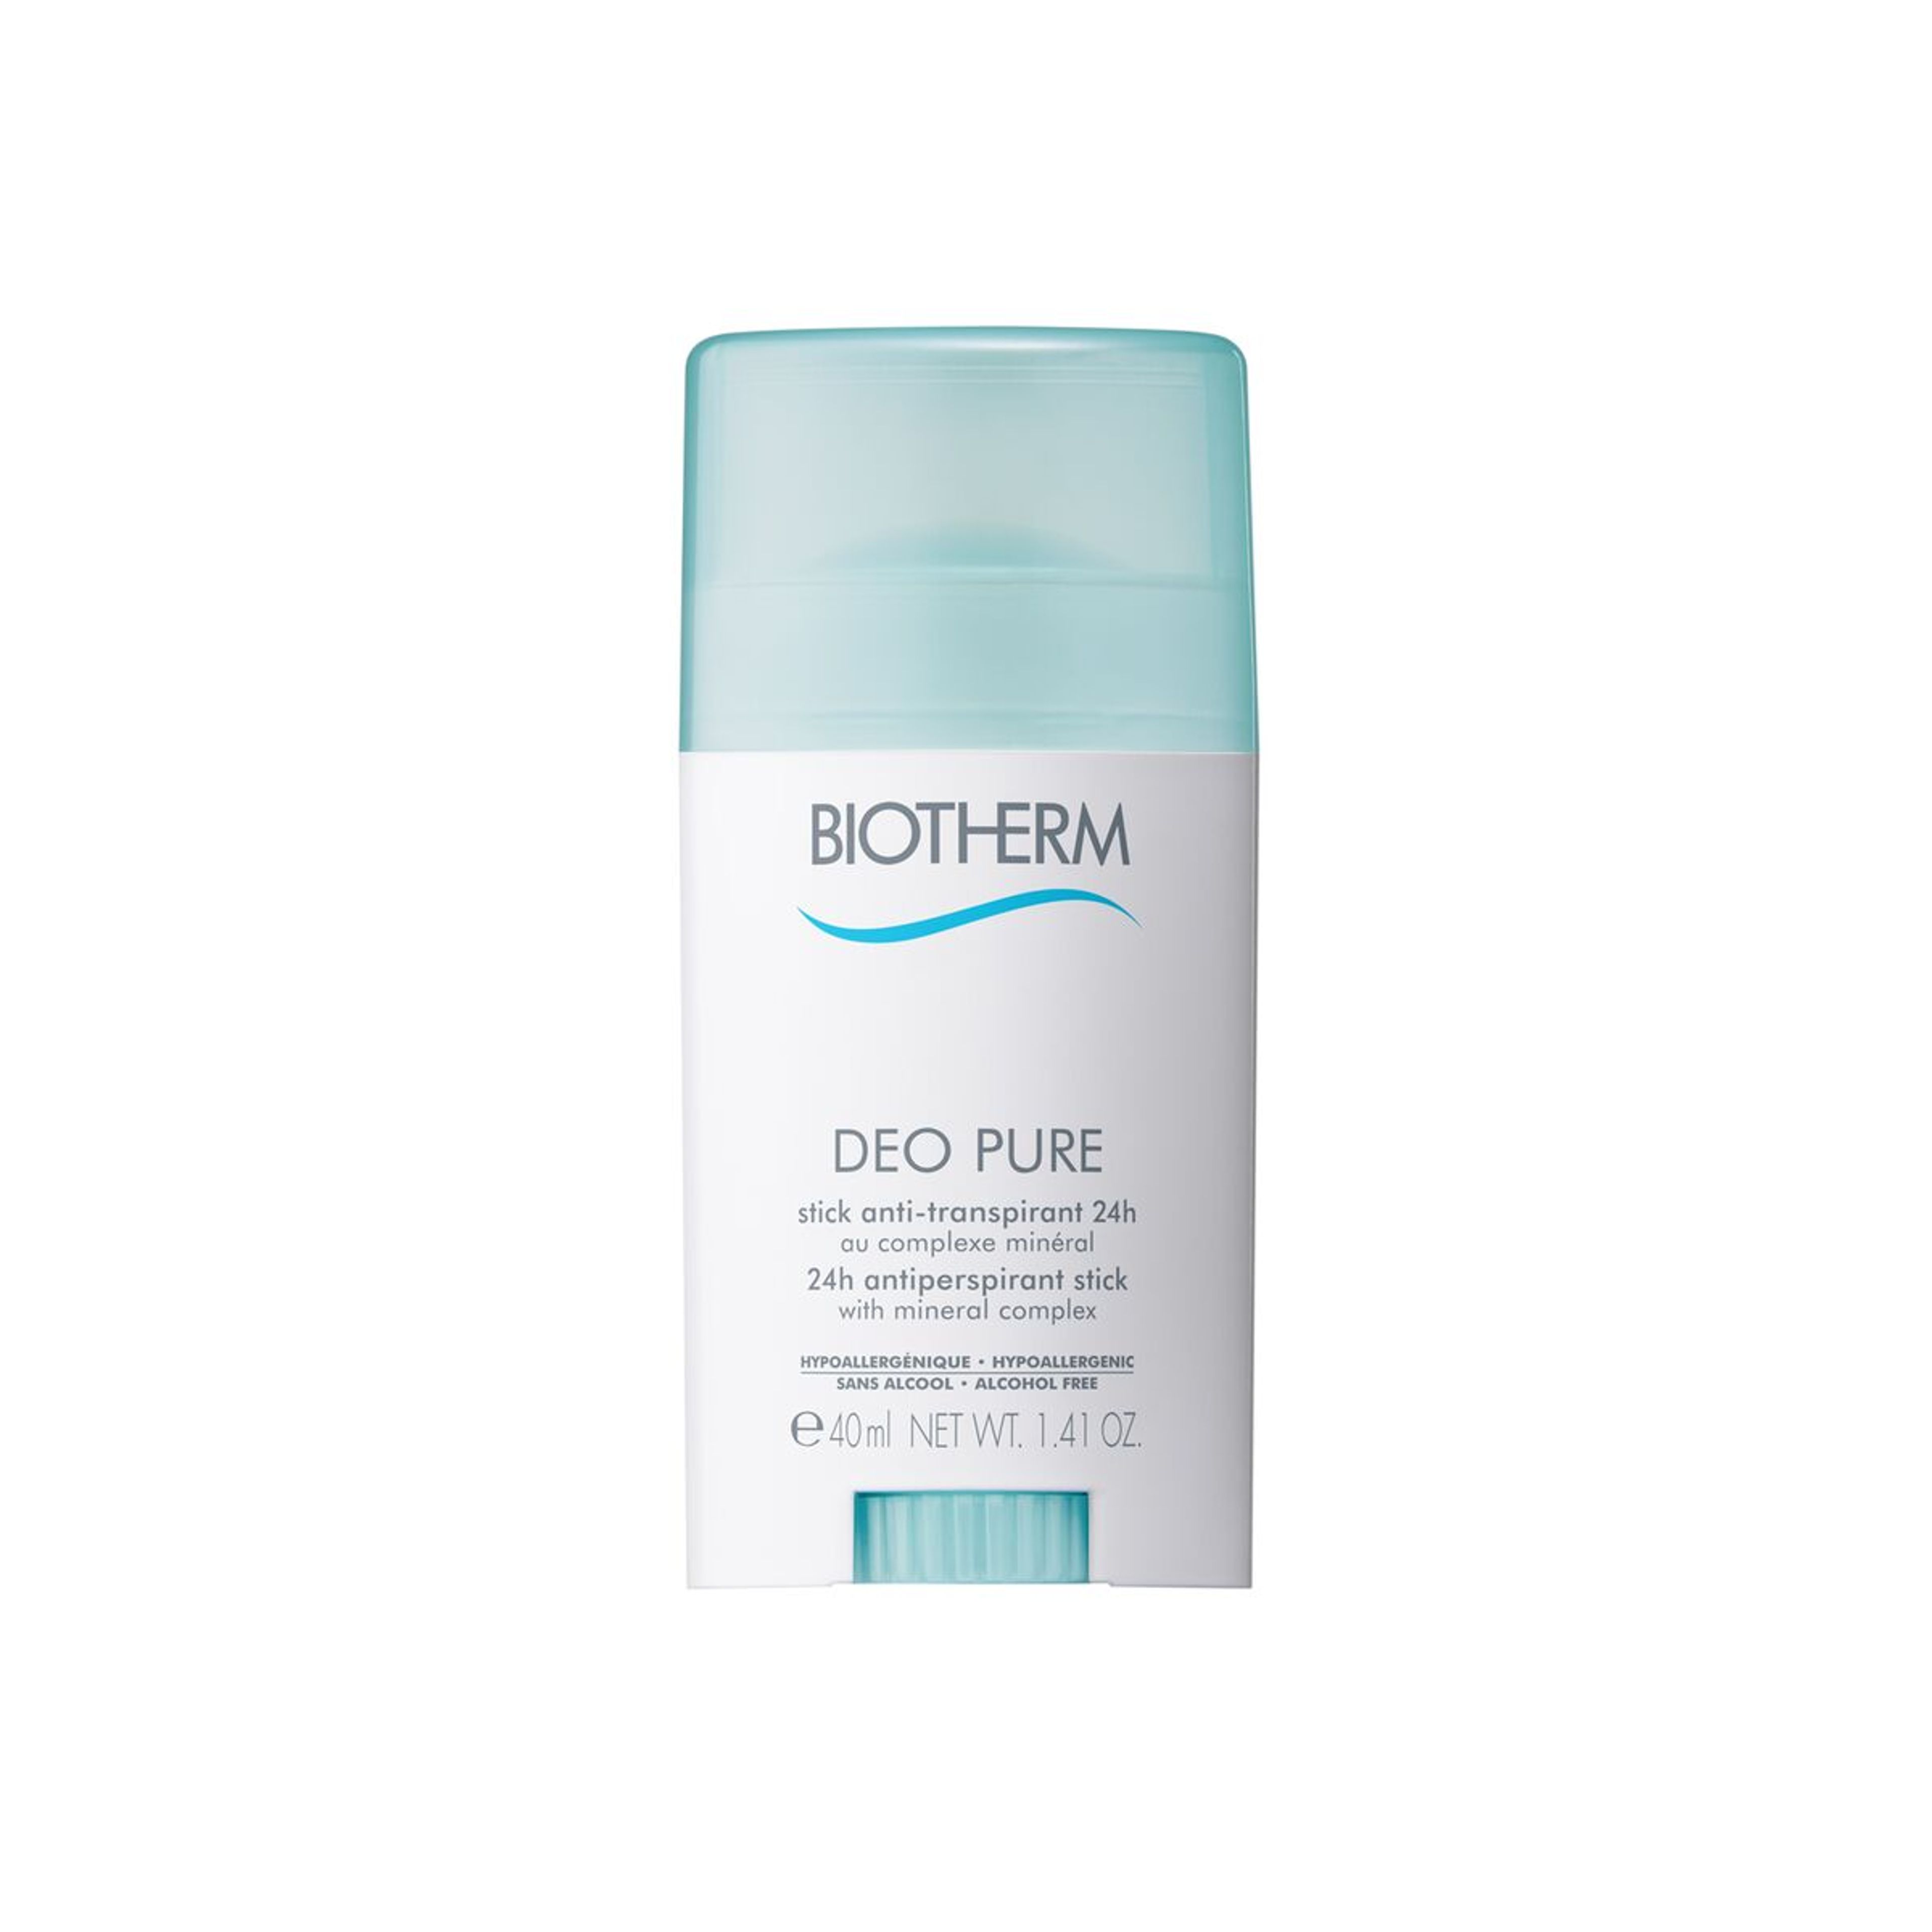 Biotherm Deo Pure Stick 1